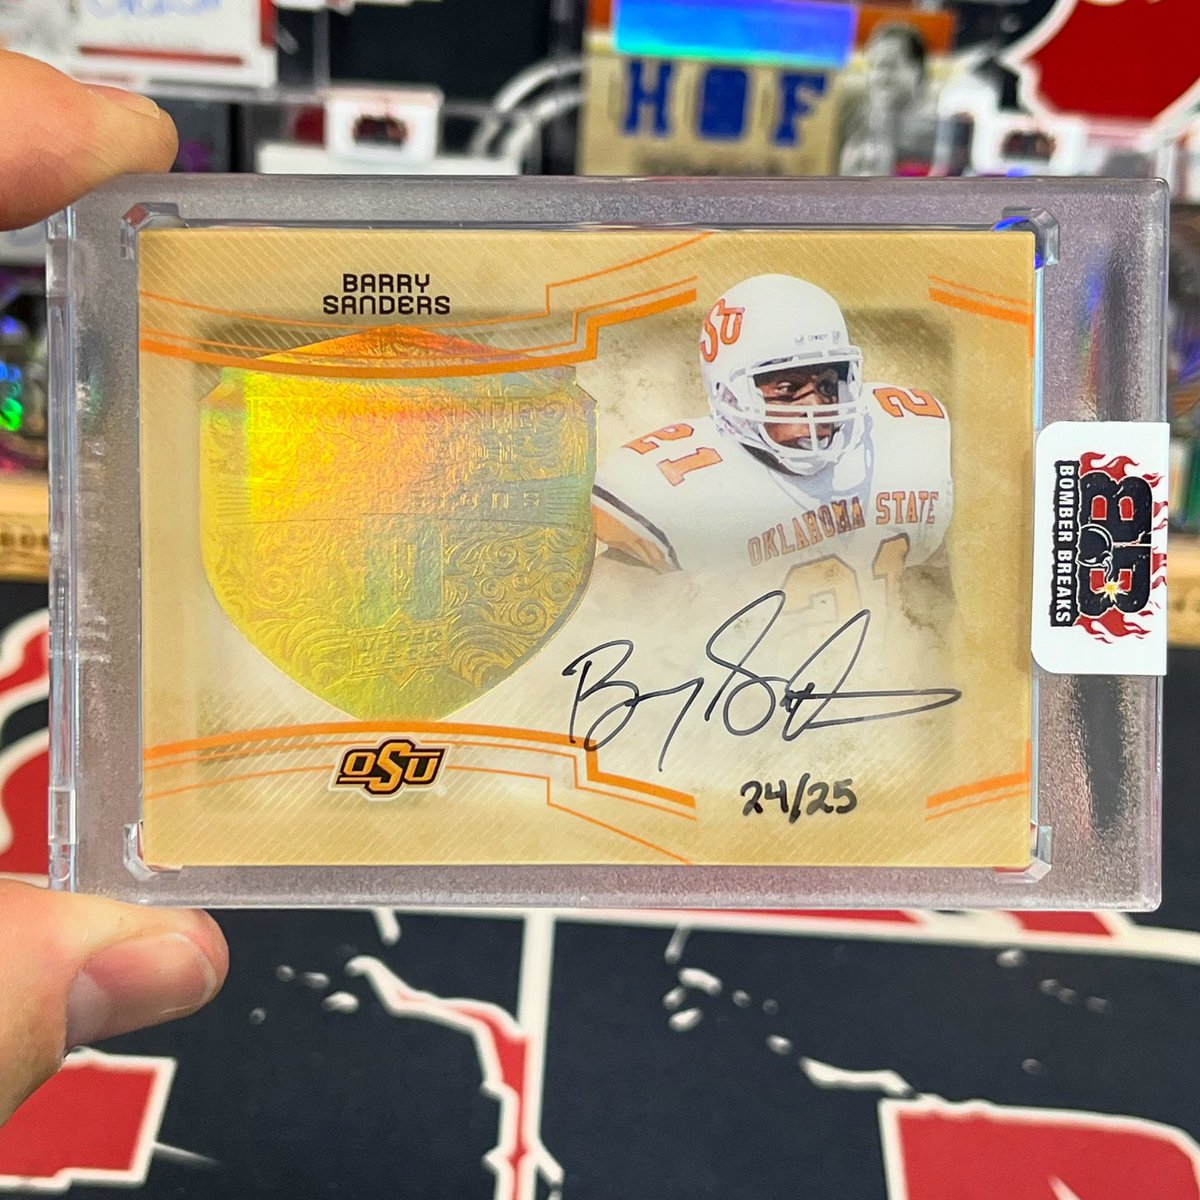 Barry Sanders /25 Exquisite Dimensions Auto pulled from our @bomberbreaks Ignition Football breaks! 💥💥 @barrysanders @upperdecksports #footballcards #exquisite #barrysanders #lions #detroitlions #groupbreaks #boxbreaks #casebreaks #thehobby #nfl #autograph #collect